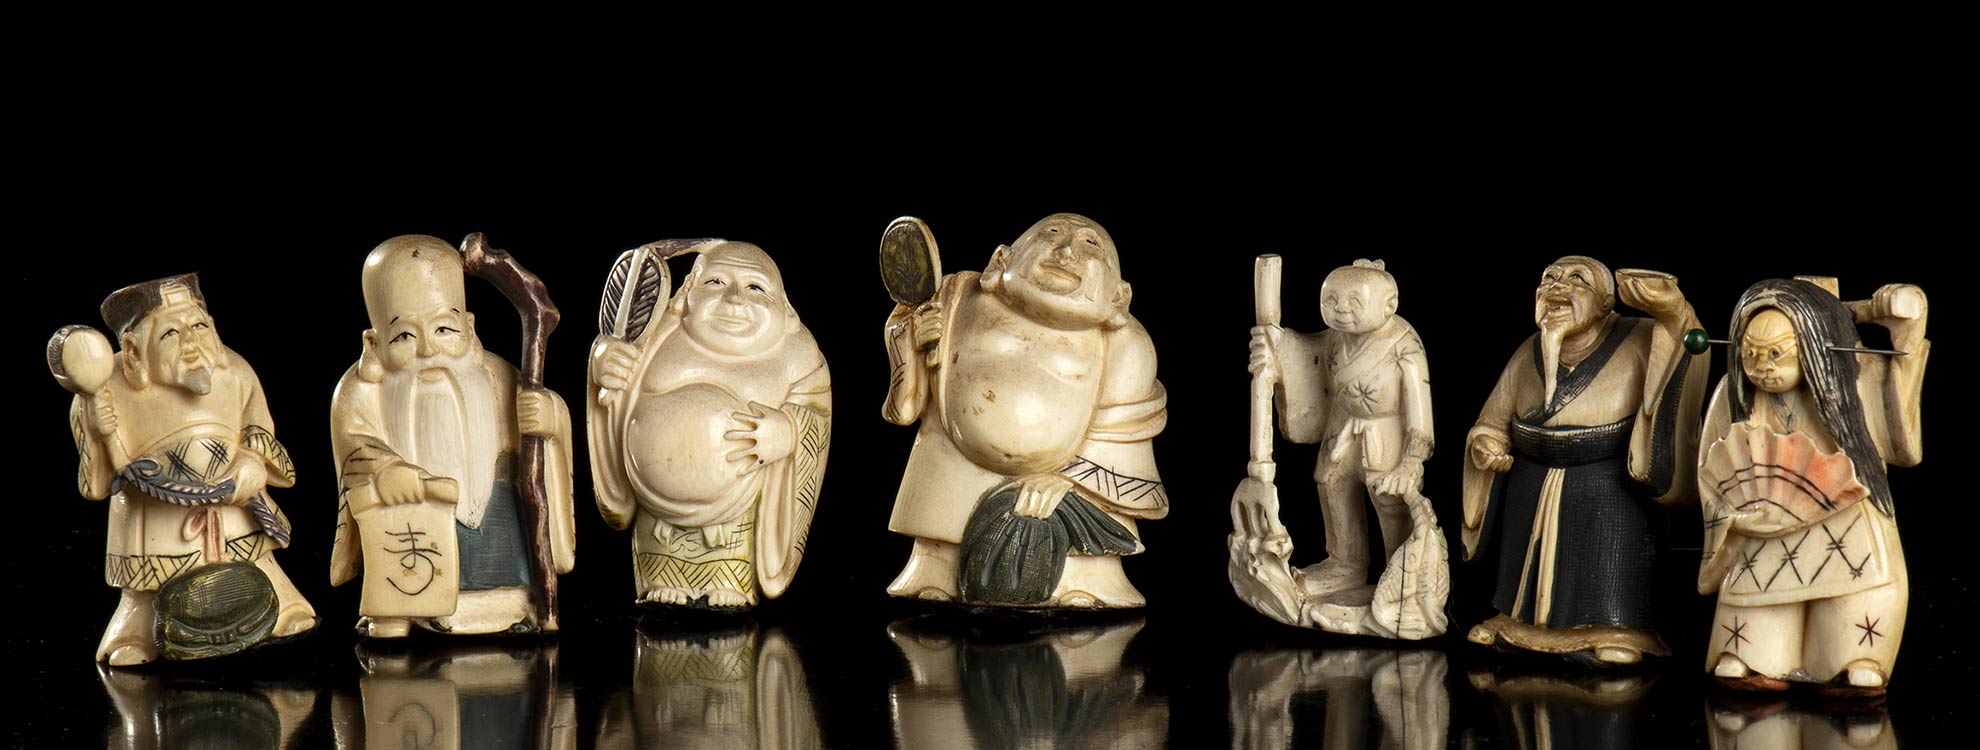 SEVEN SMALL IVORY FIGURES
China, ... 